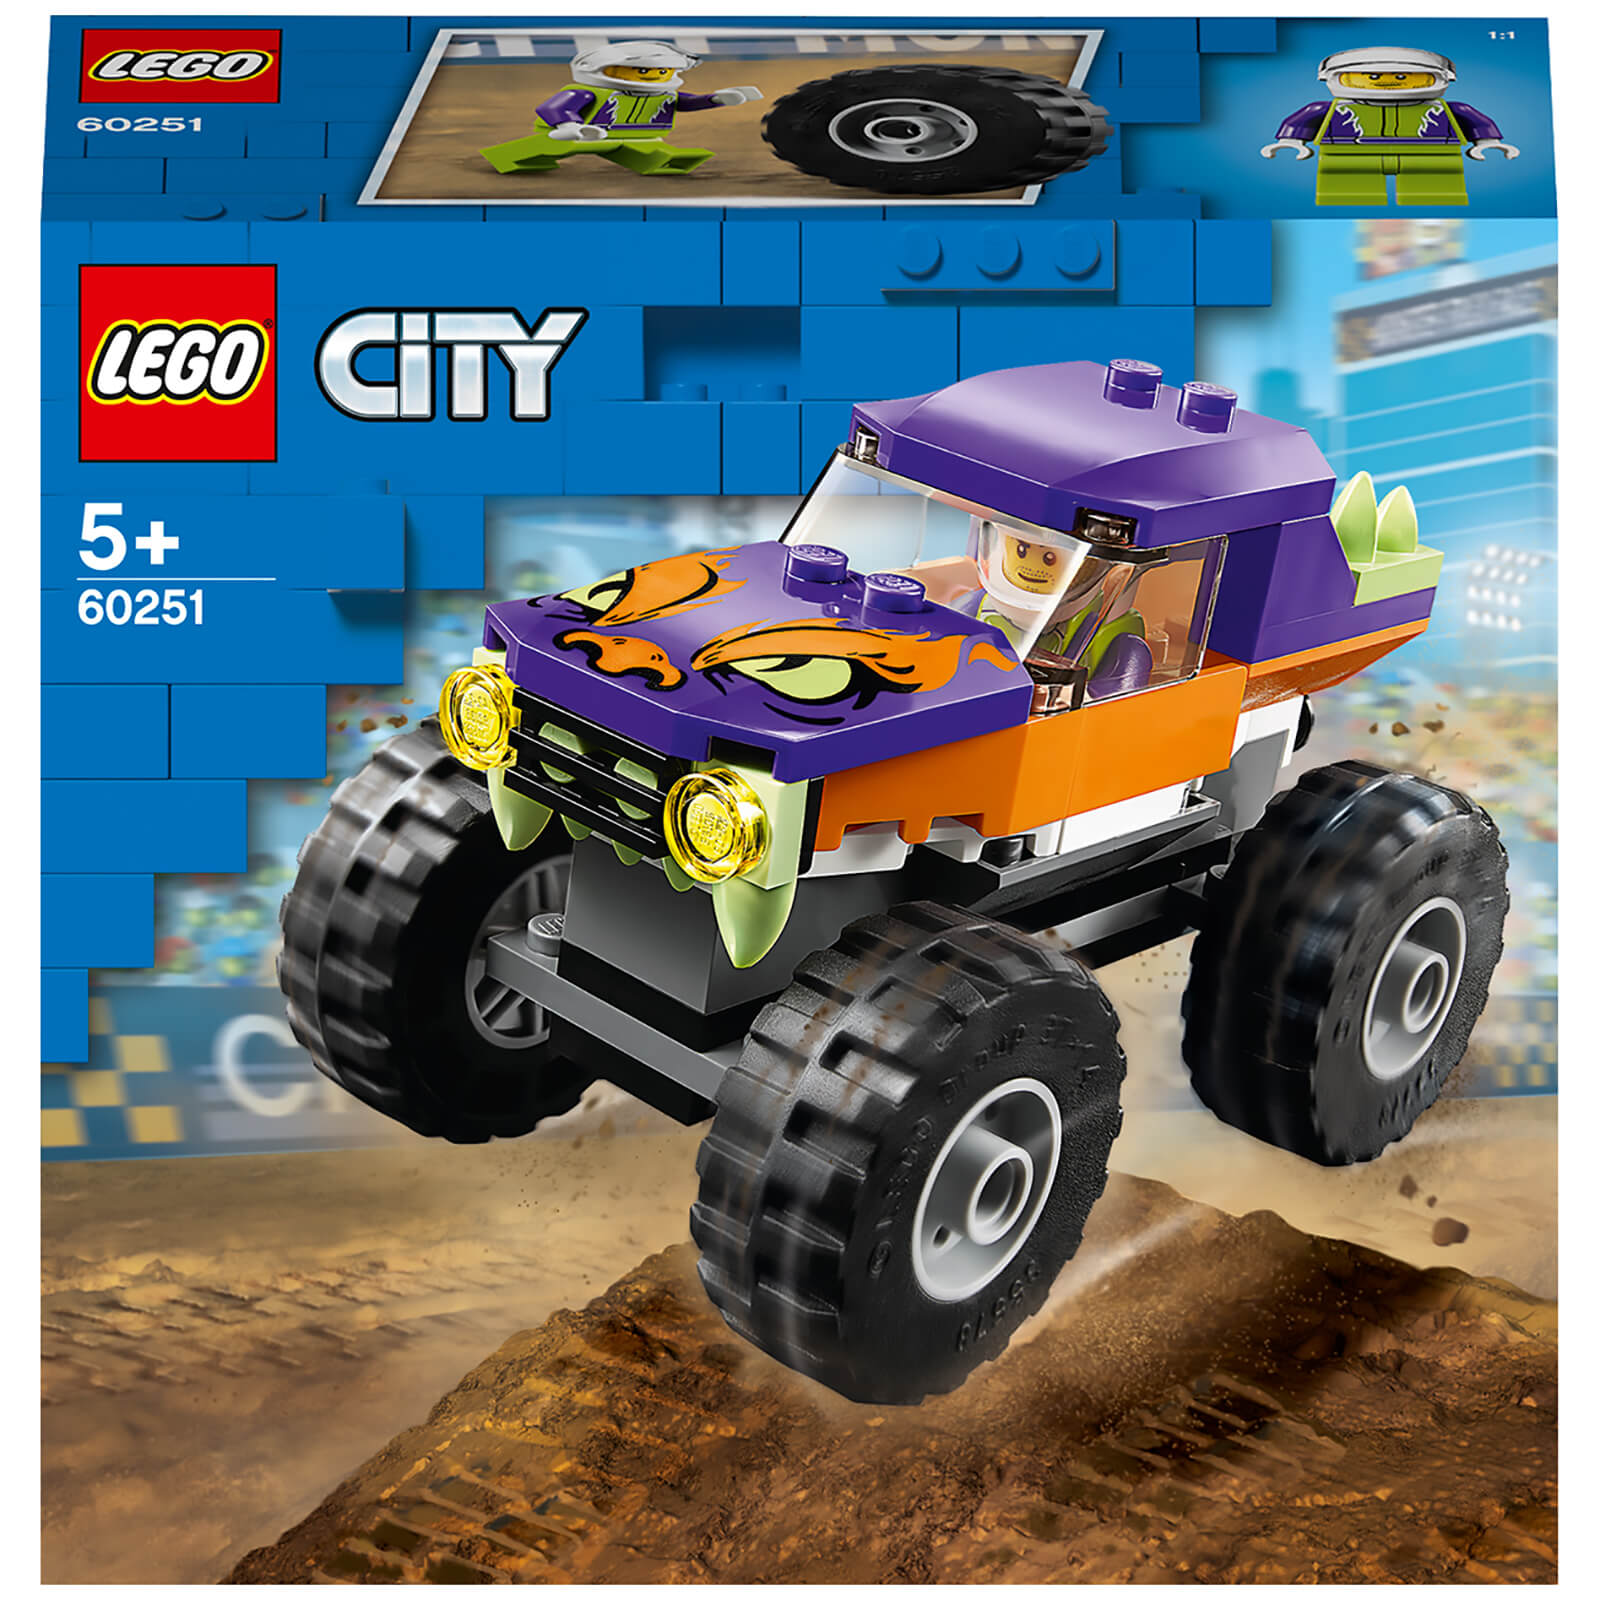 LEGO City: Great Vehicles Monster Truck Toy (60251)